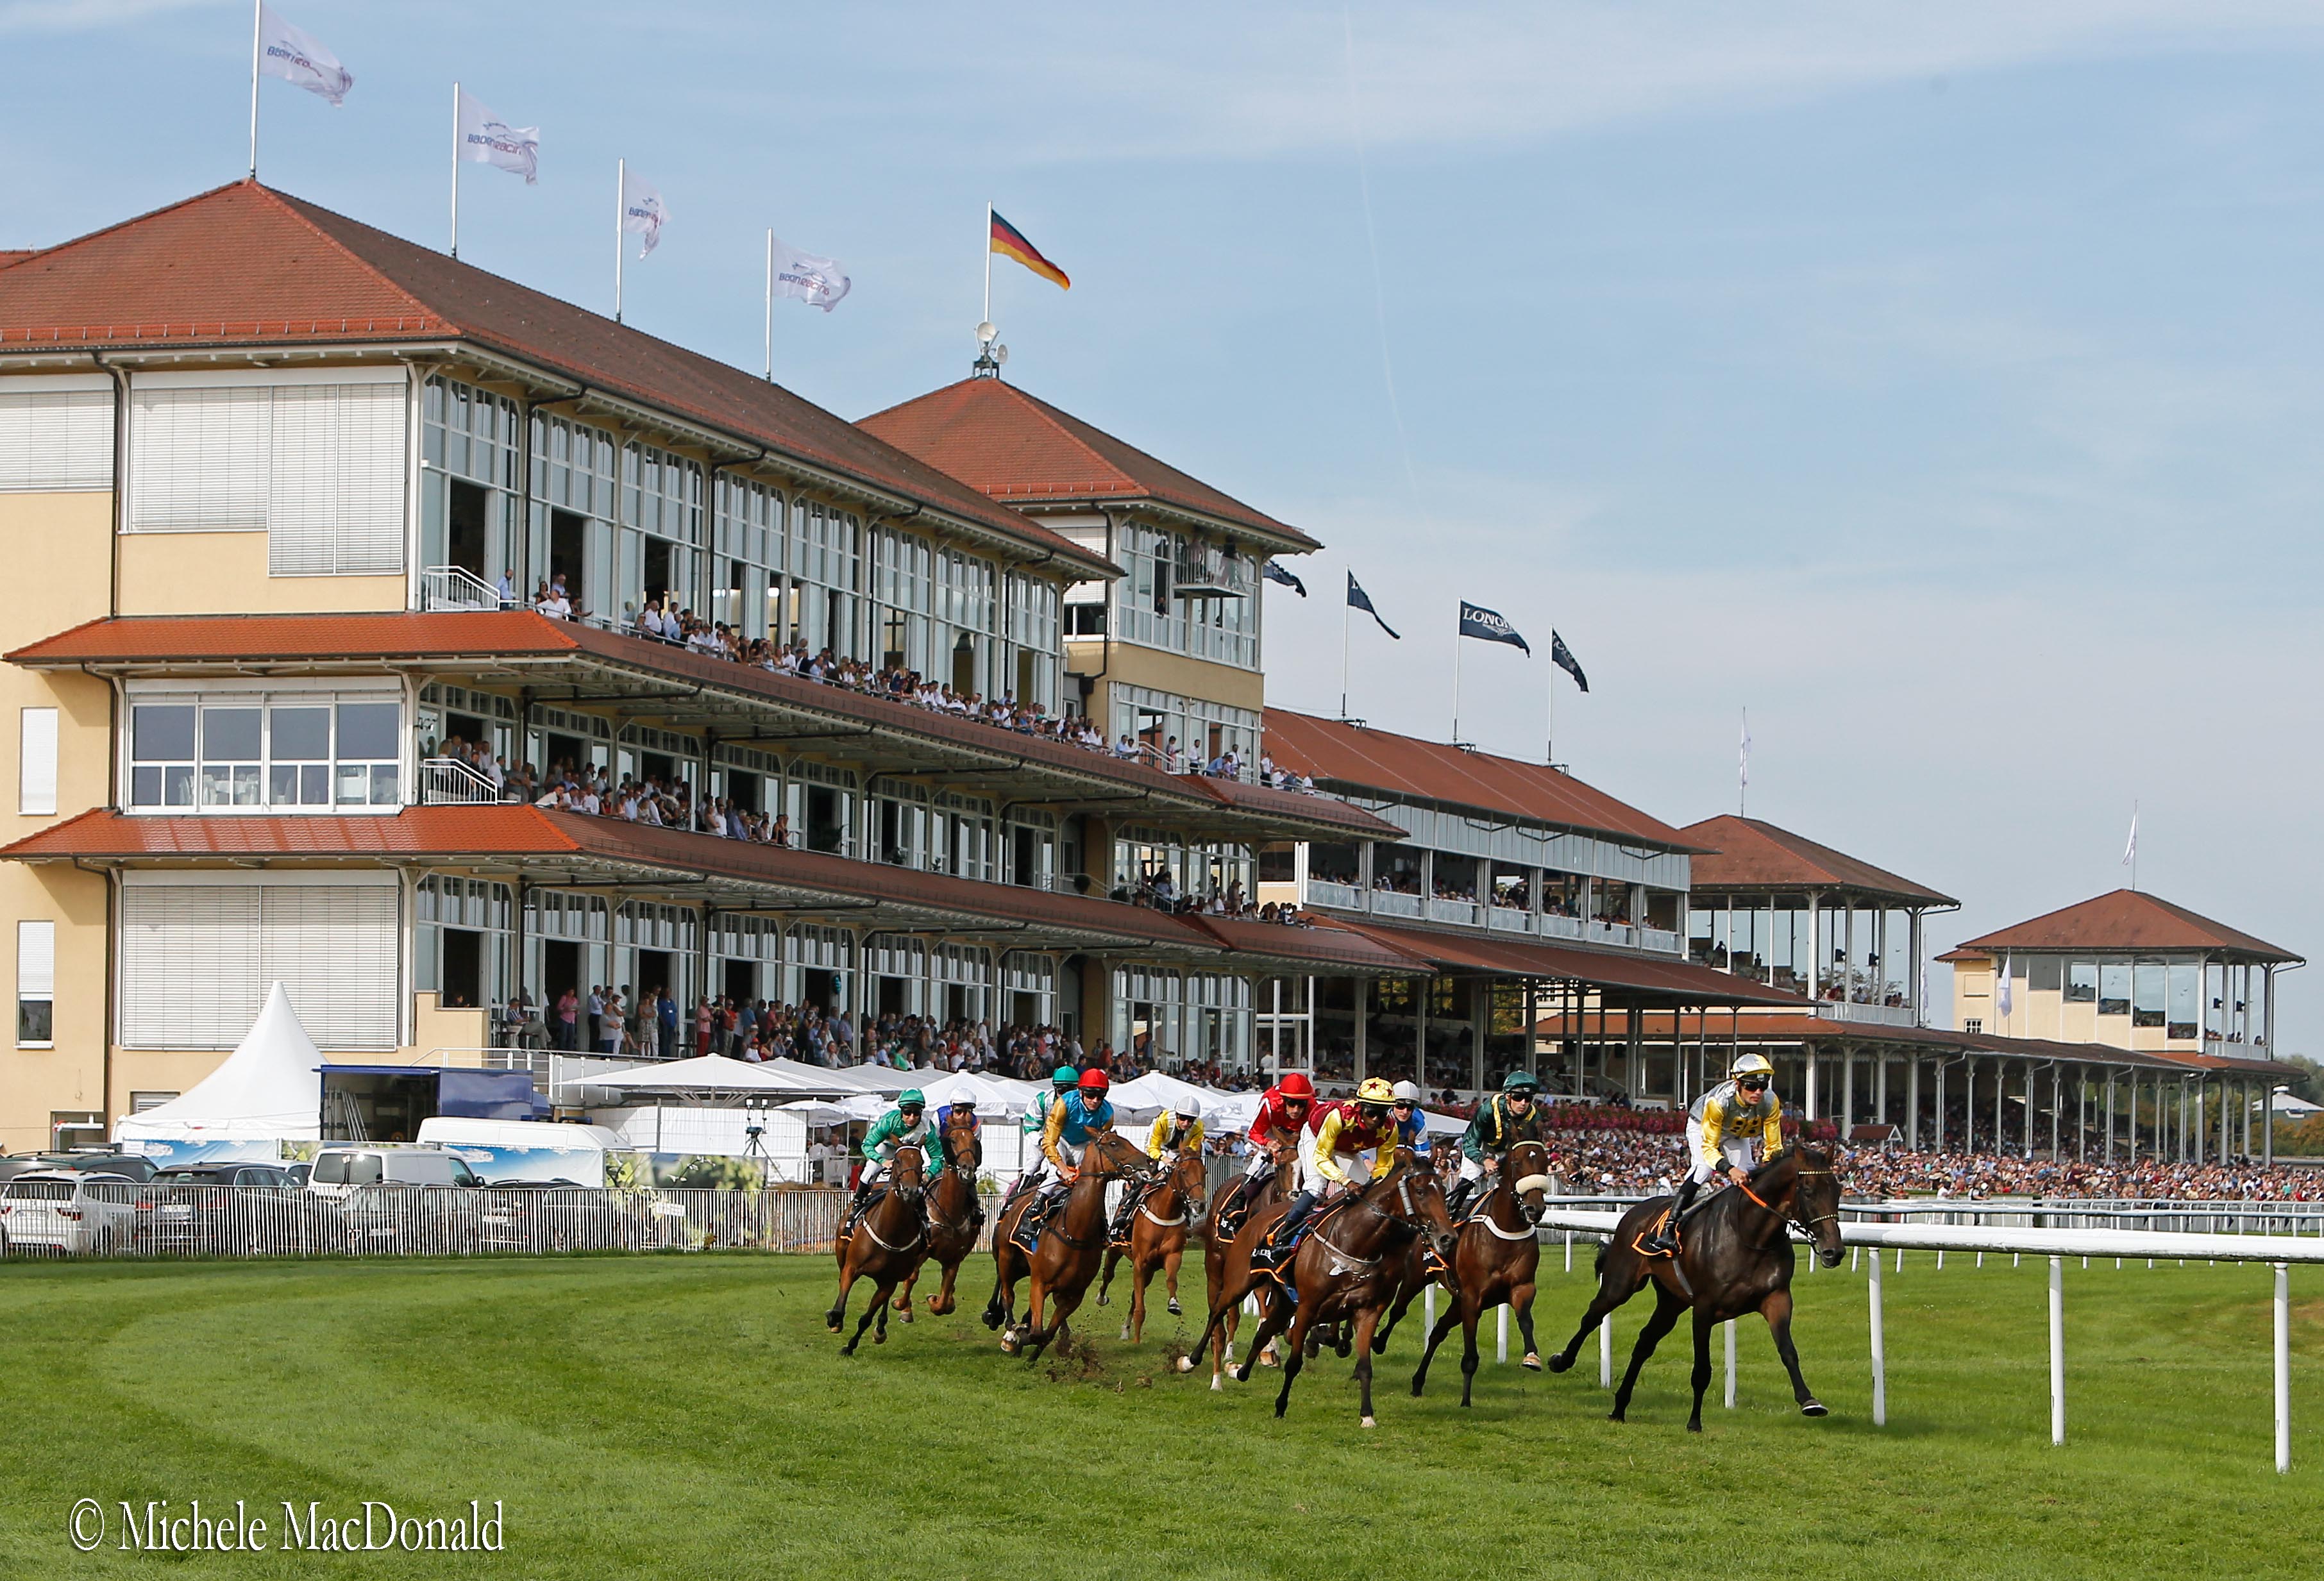 Action at Baden-Baden at the big September meeting during Great Week. The aim is to make it a racecourse that can be ‘mentioned in one breath with Ascot and Longchamp’. Photo: Michele MacDonald